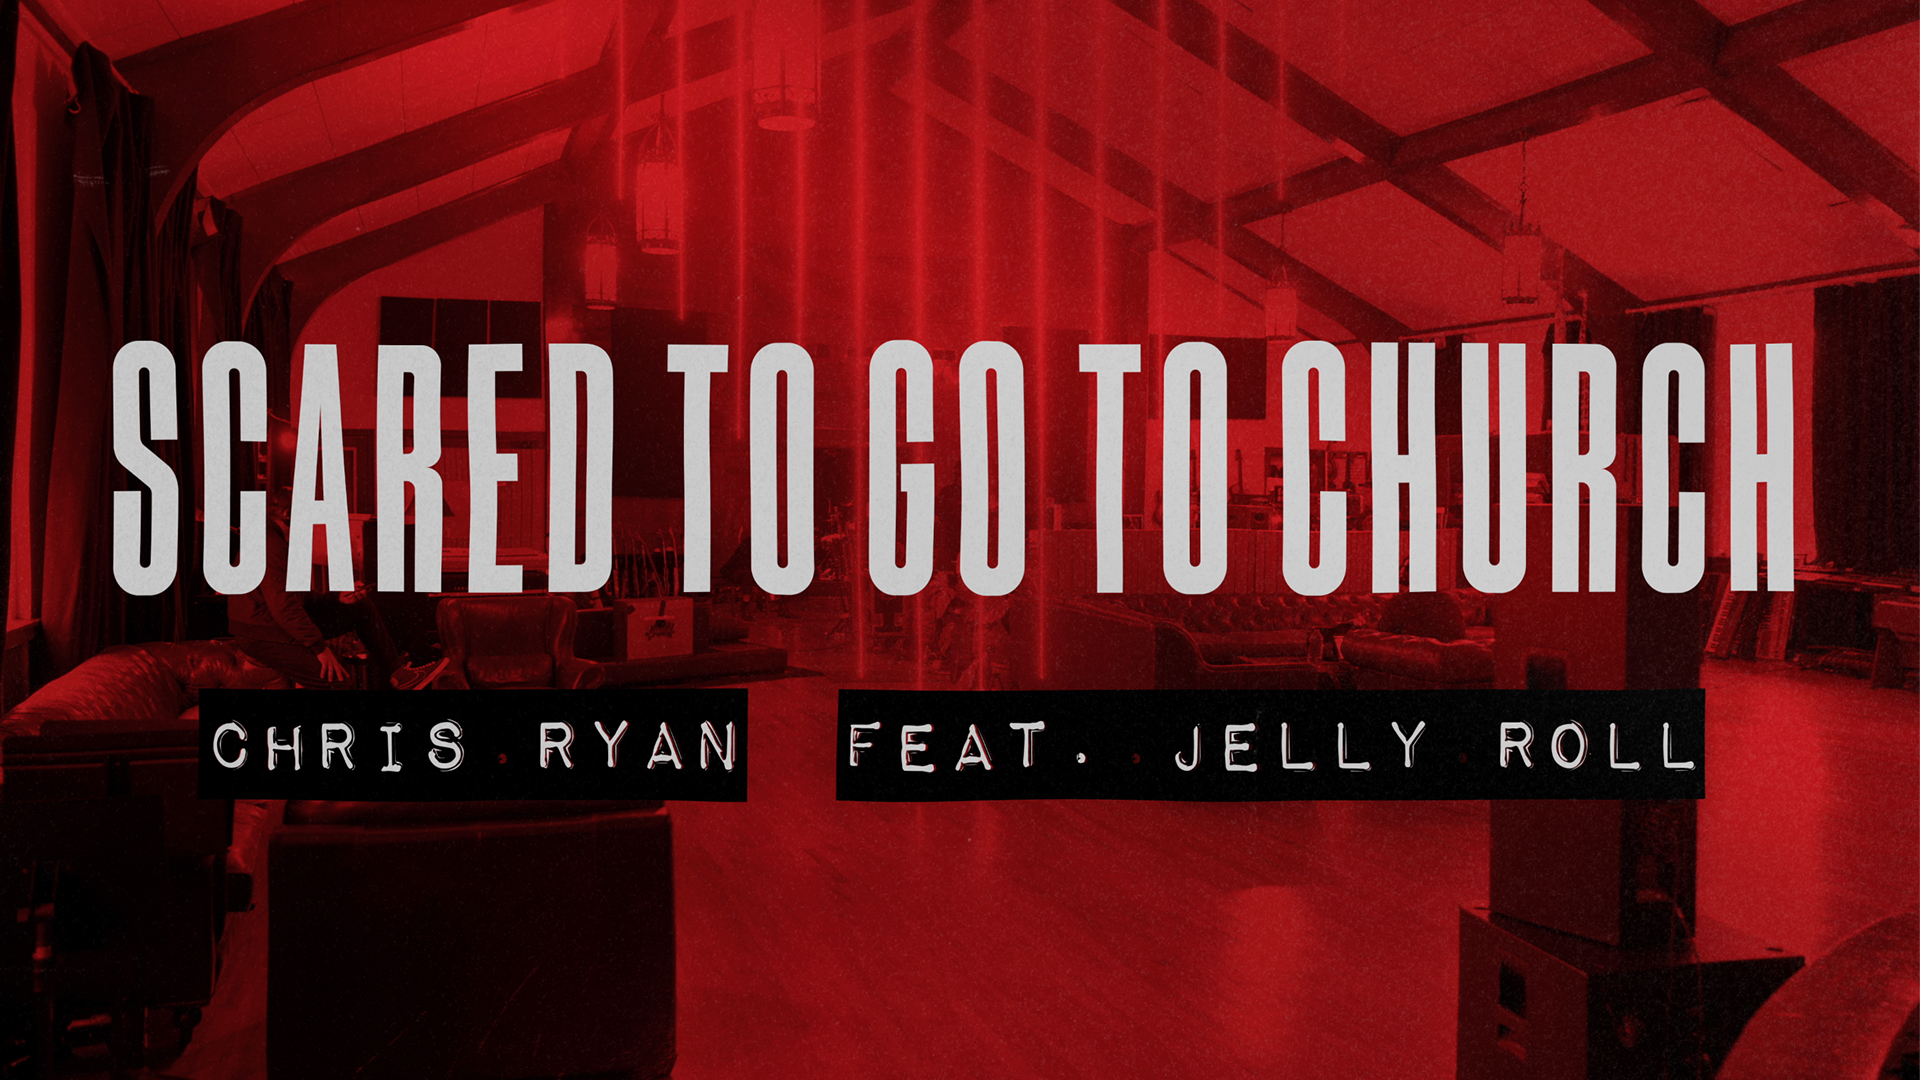 Chris Ryan - Scared To Go To Church (feat. Jelly Roll)